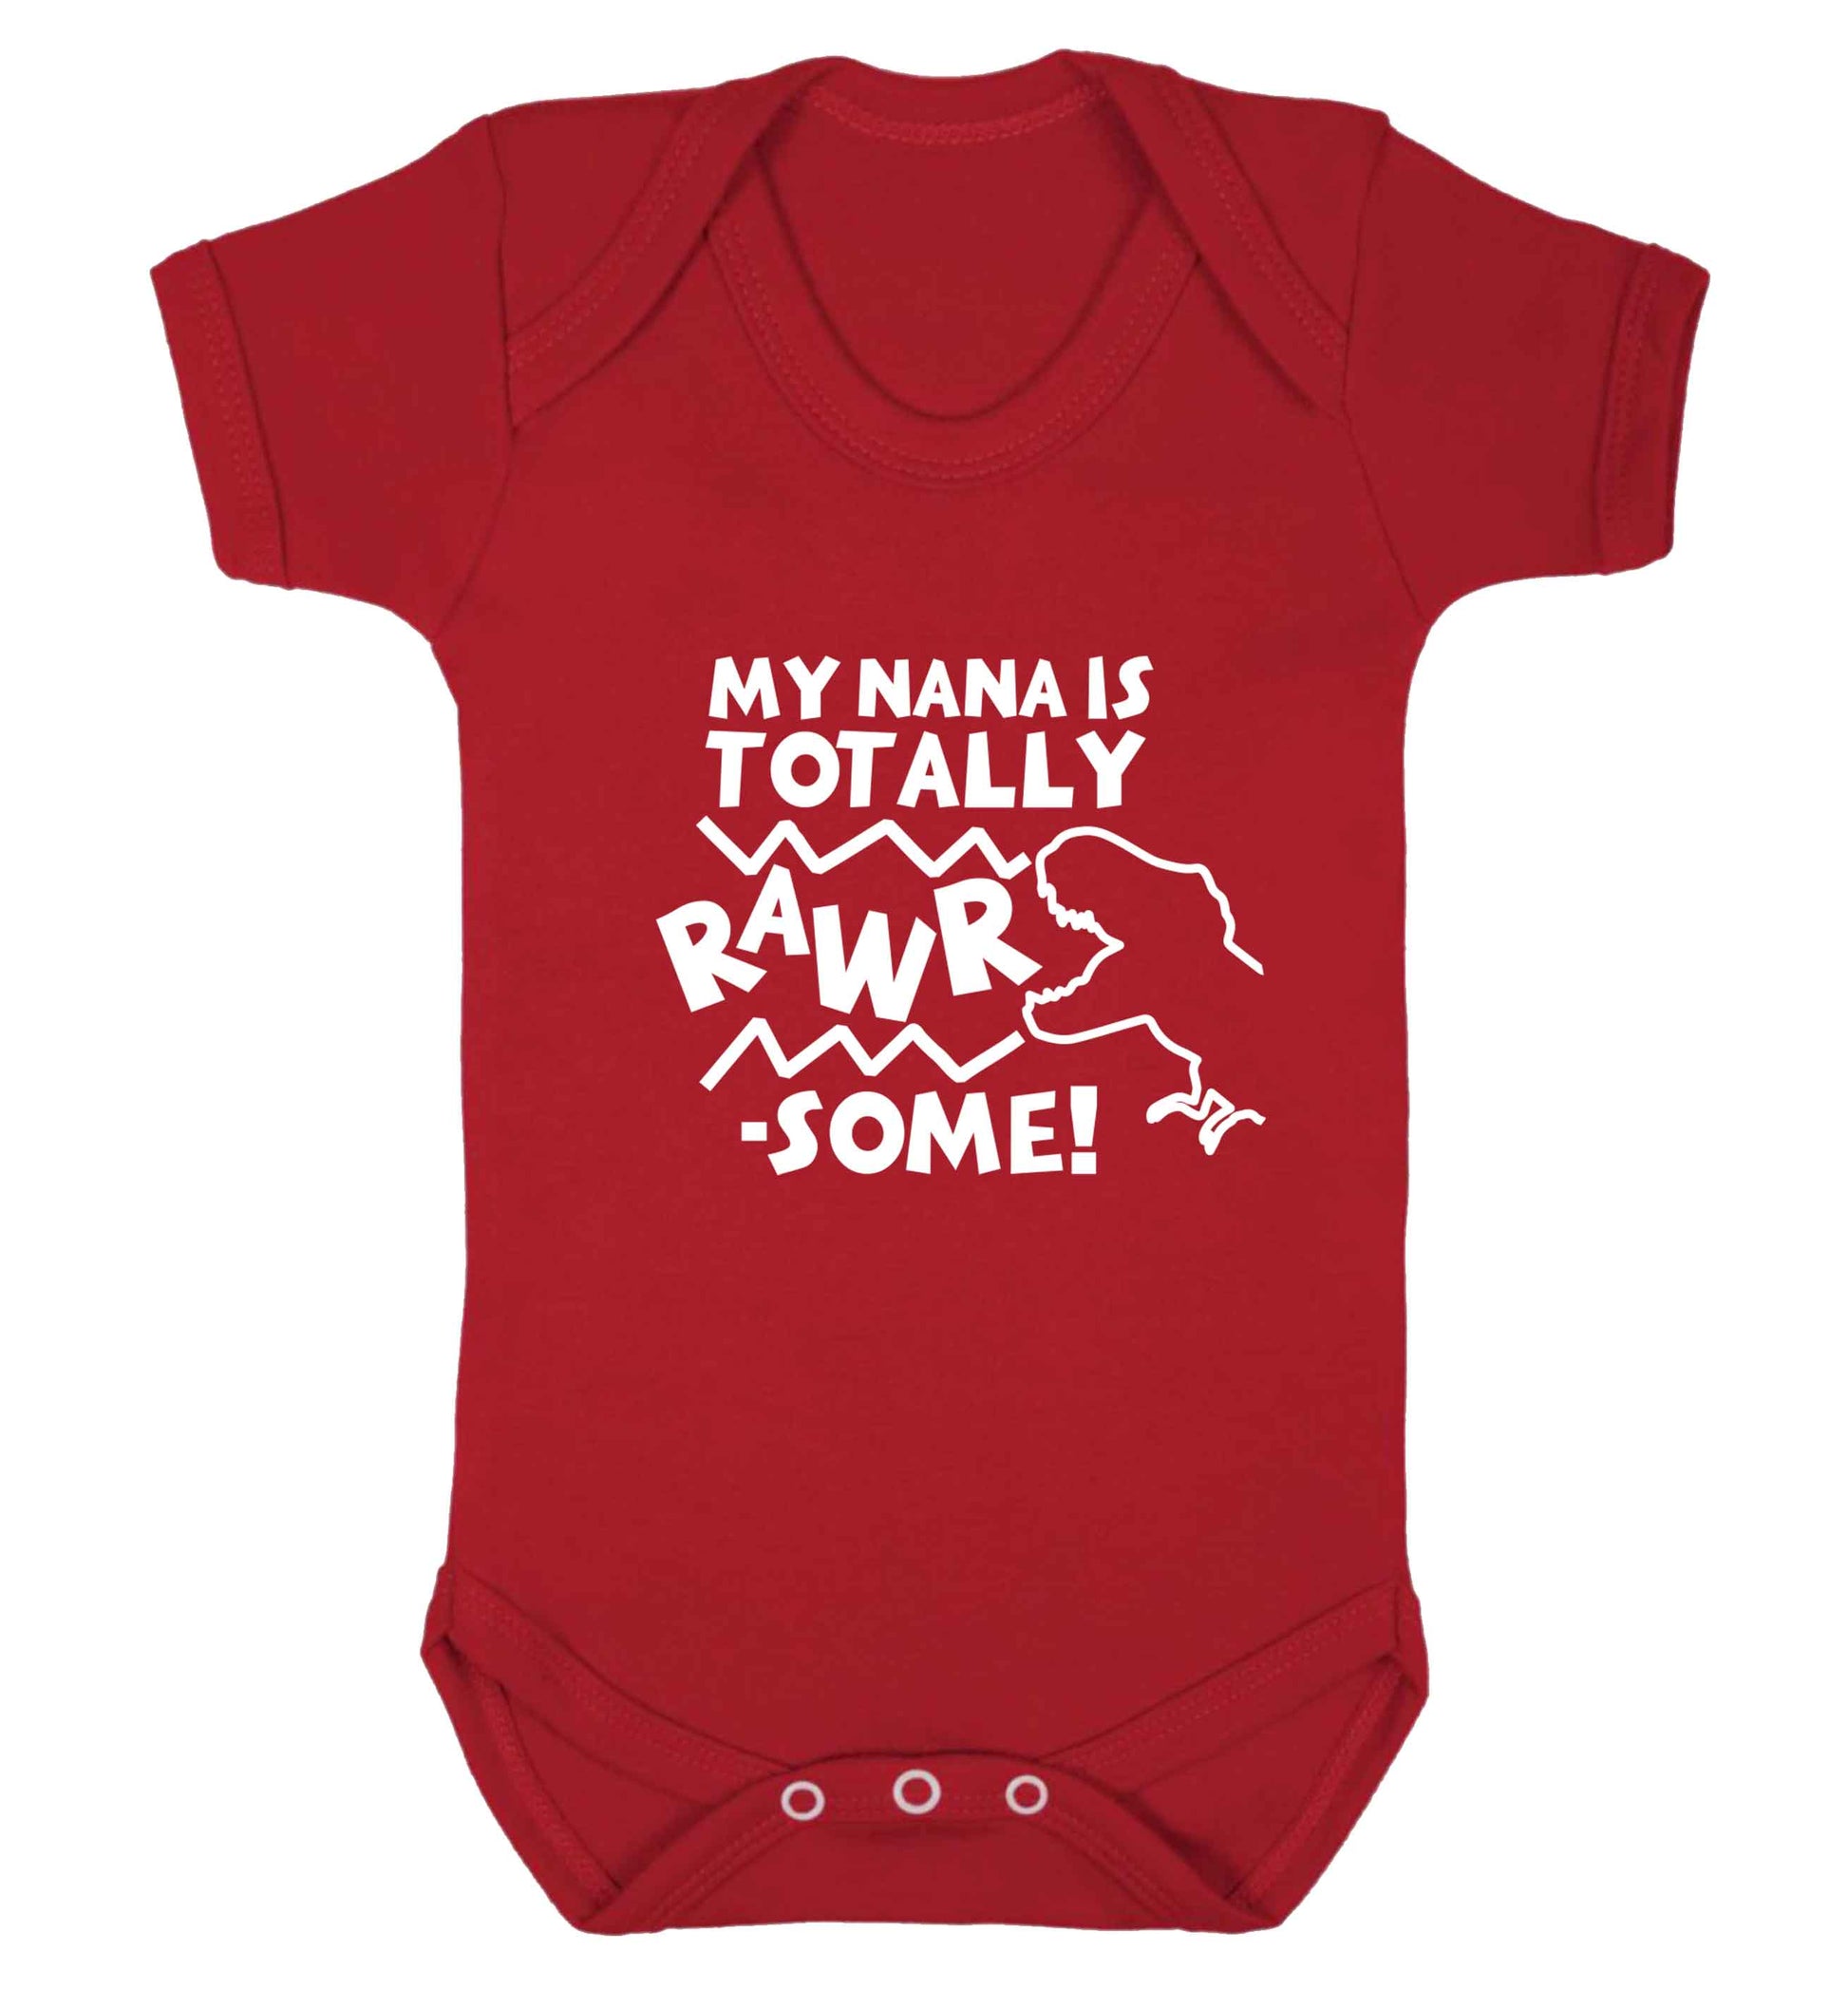 My nana is totally rawrsome baby vest red 18-24 months